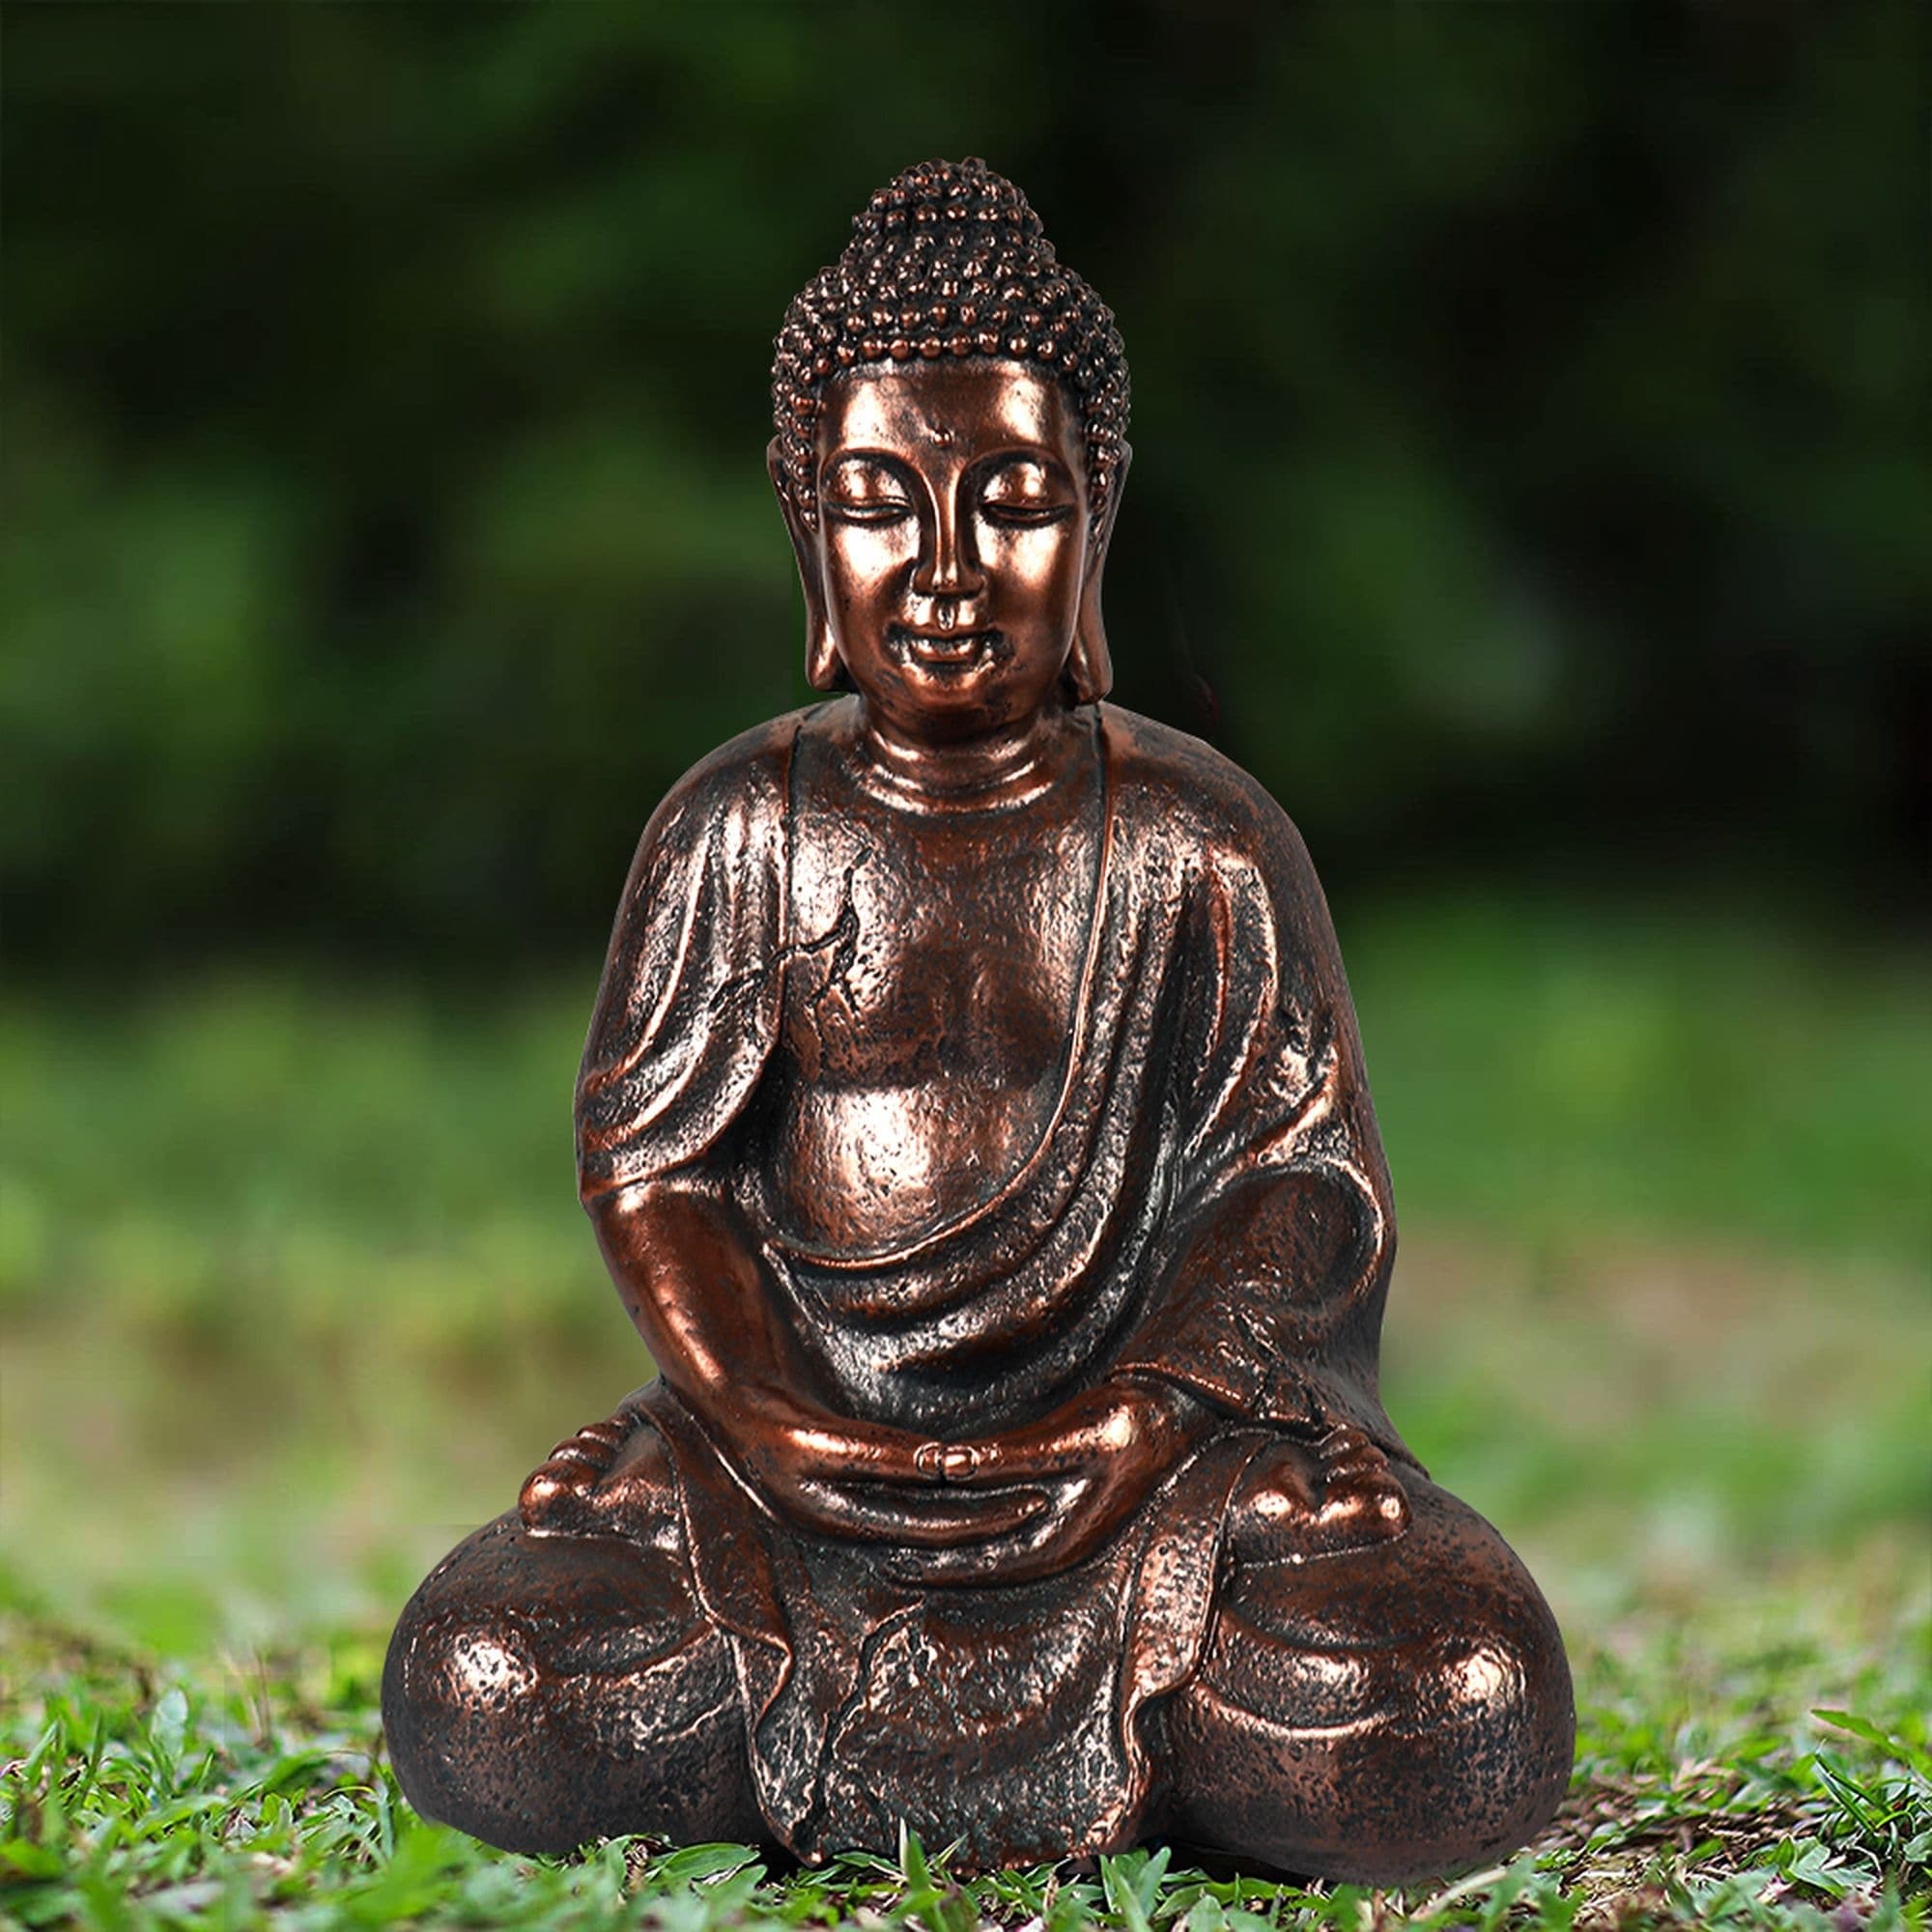 https://ak1.ostkcdn.com/images/products/is/images/direct/6022f299a24610265a8f1126db0266a2447e9016/Meditating-Buddha-Outdoor-Garden-Statue.jpg